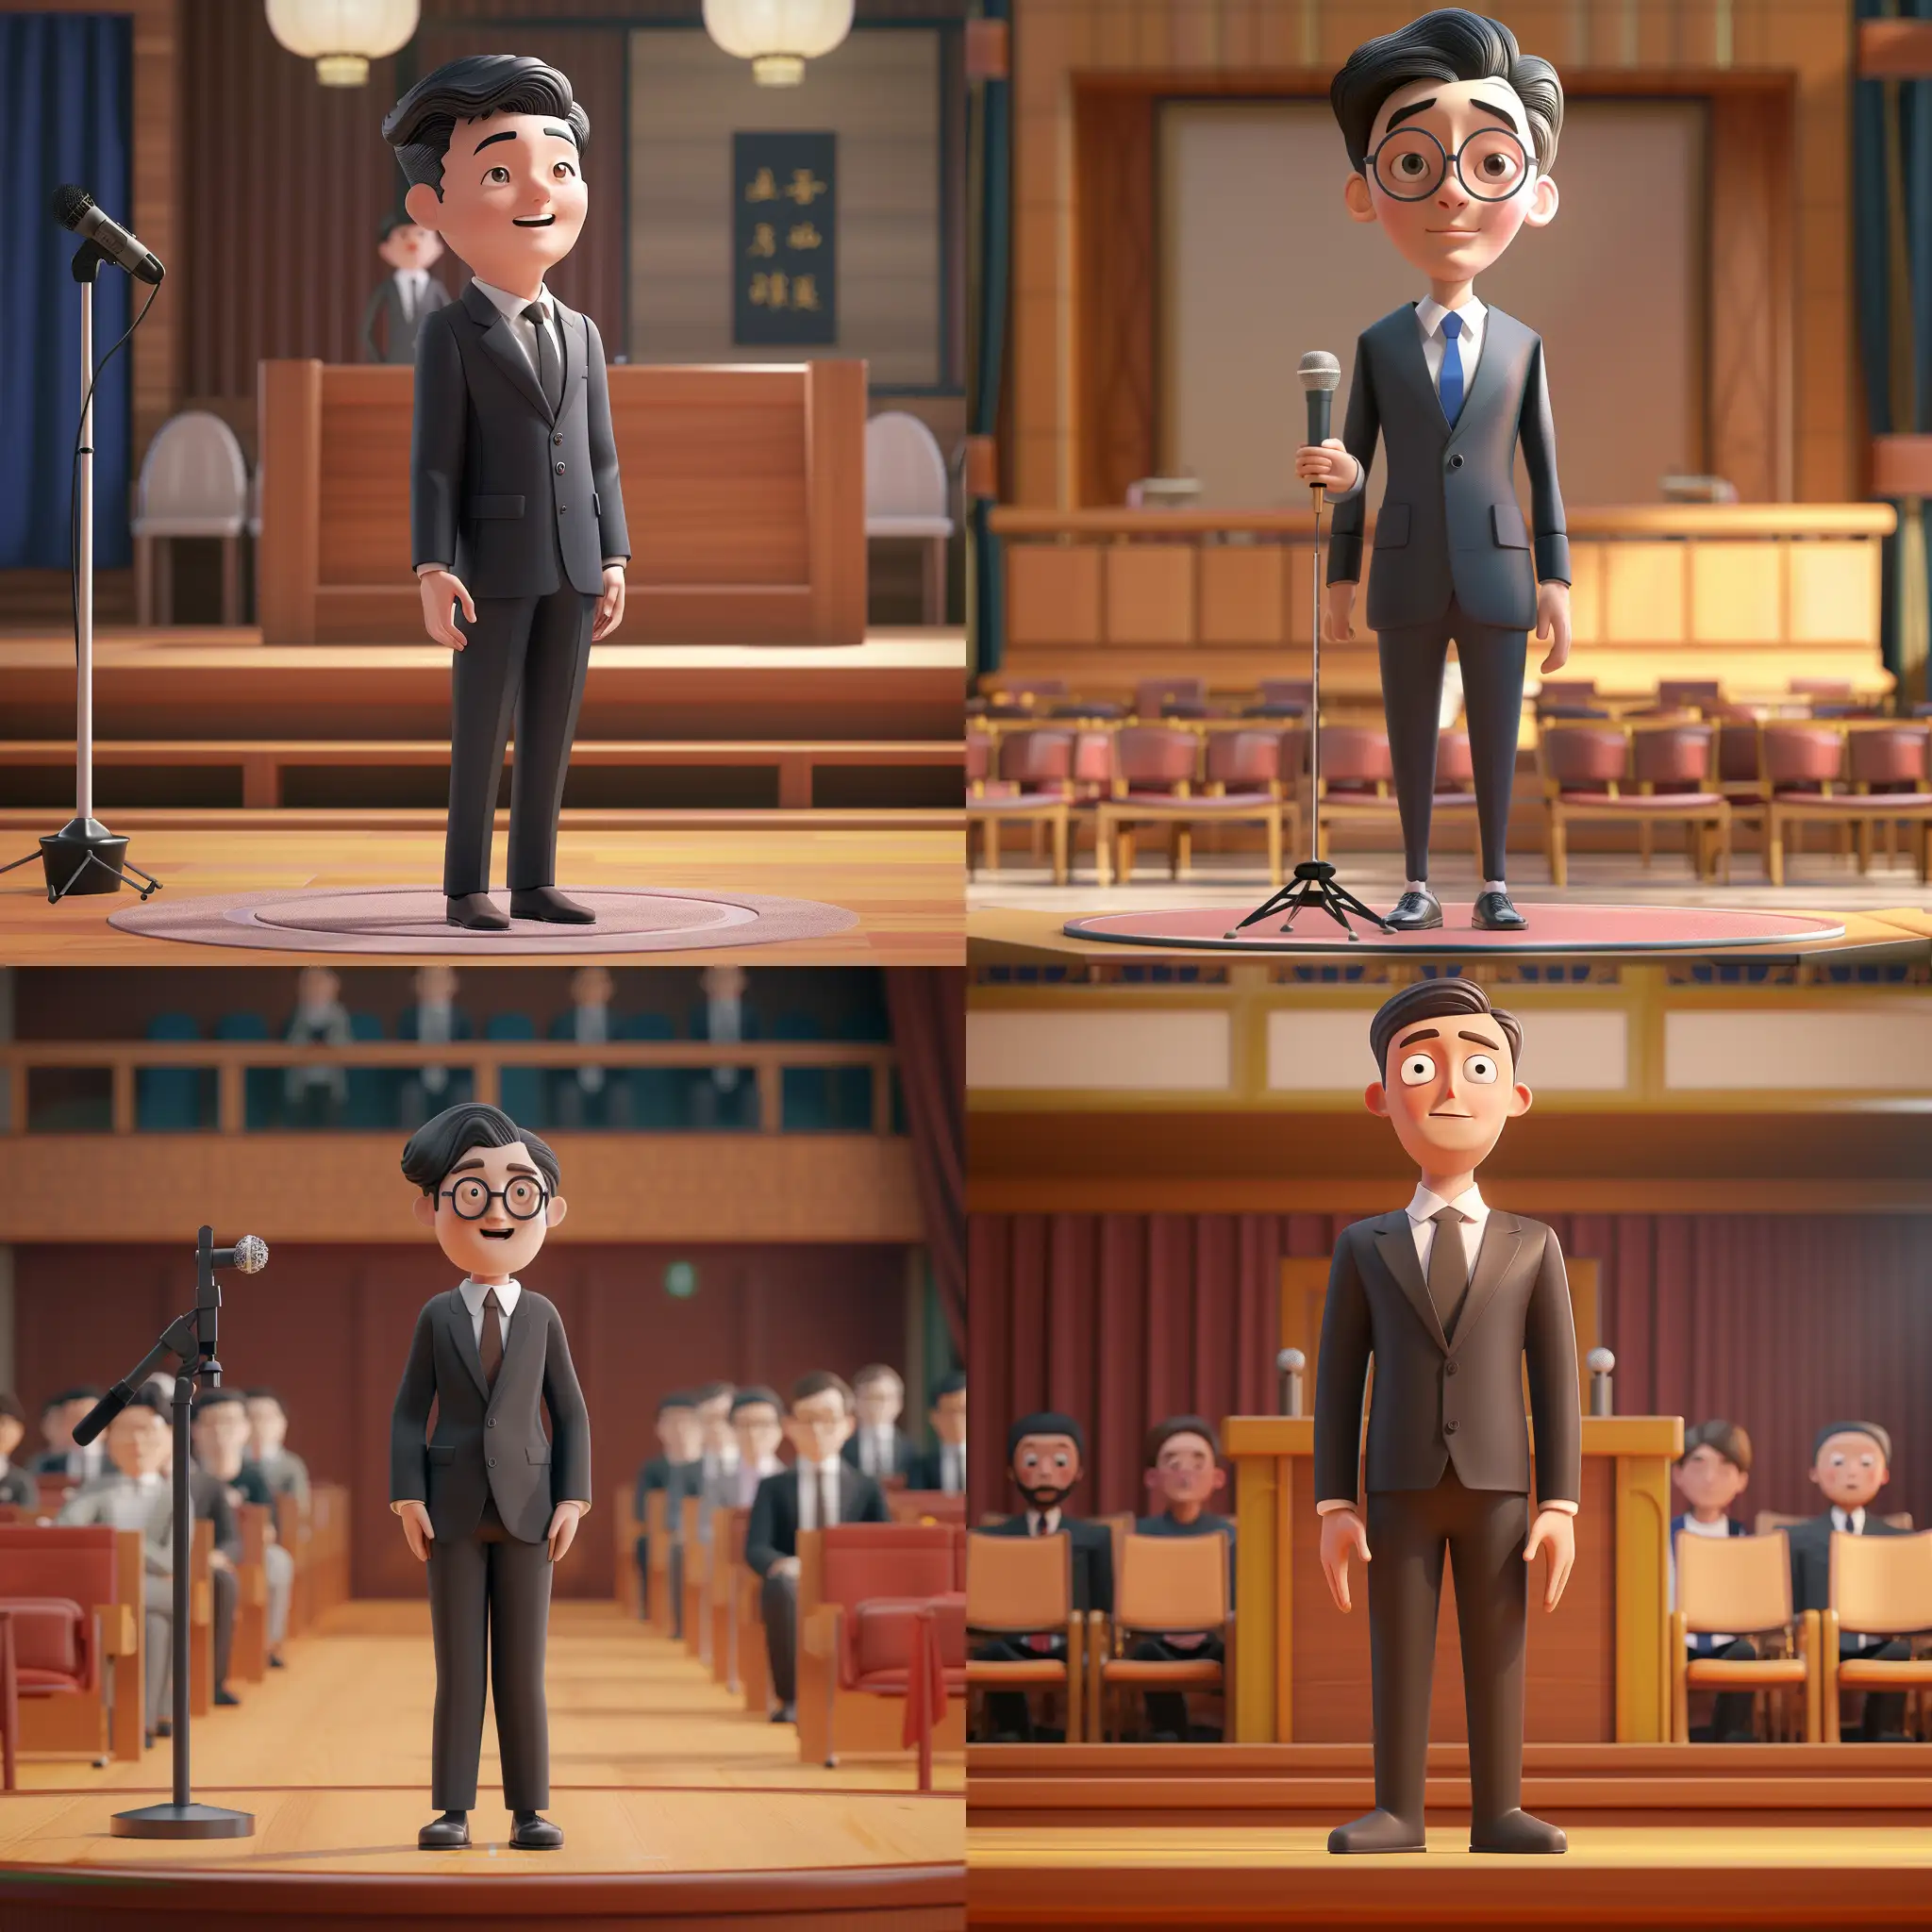 Create a 3D animated character of a Public Speaking Coach, confidently coaching clients in an elegant lecture hall in Hong Kong, maintaining the same style and character proportions. The character should radiate authority and supportiveness, dressed in professional attire, with a stage, microphone, and audience seating hinting at the training environment. Emphasize a color palette that includes serene shades close to #2563eb, to echo the composed and reliable atmosphere needed for mastering public speaking.
